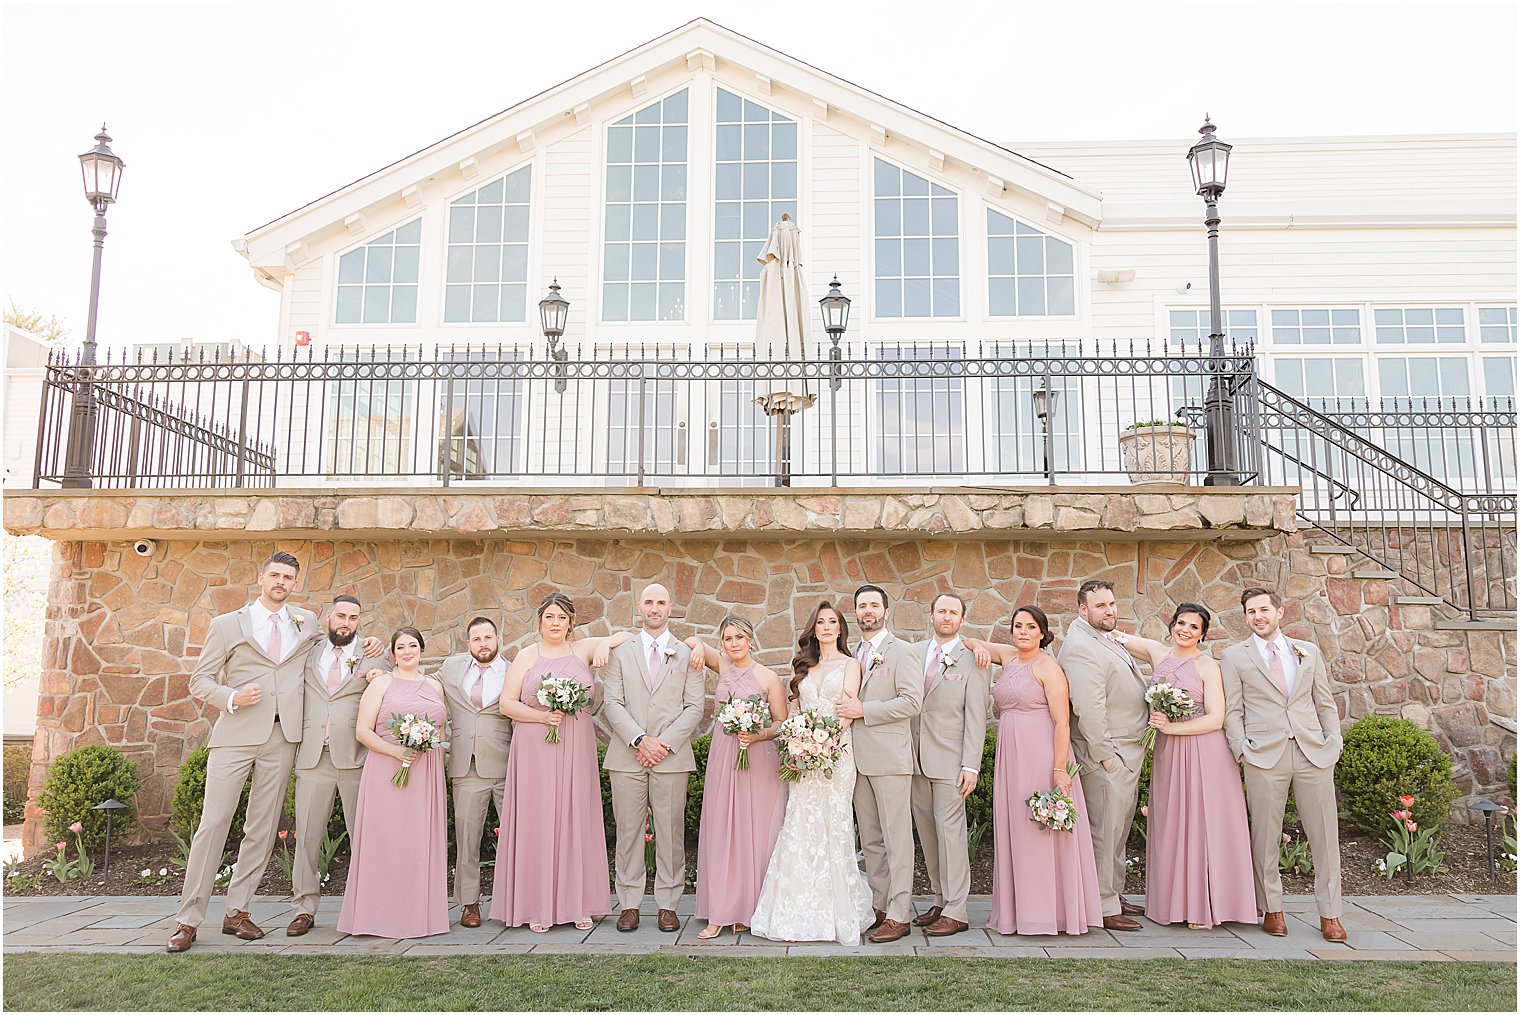 bride and groom pose with bridesmaids in pink gowns and groomsmen in tan suits 